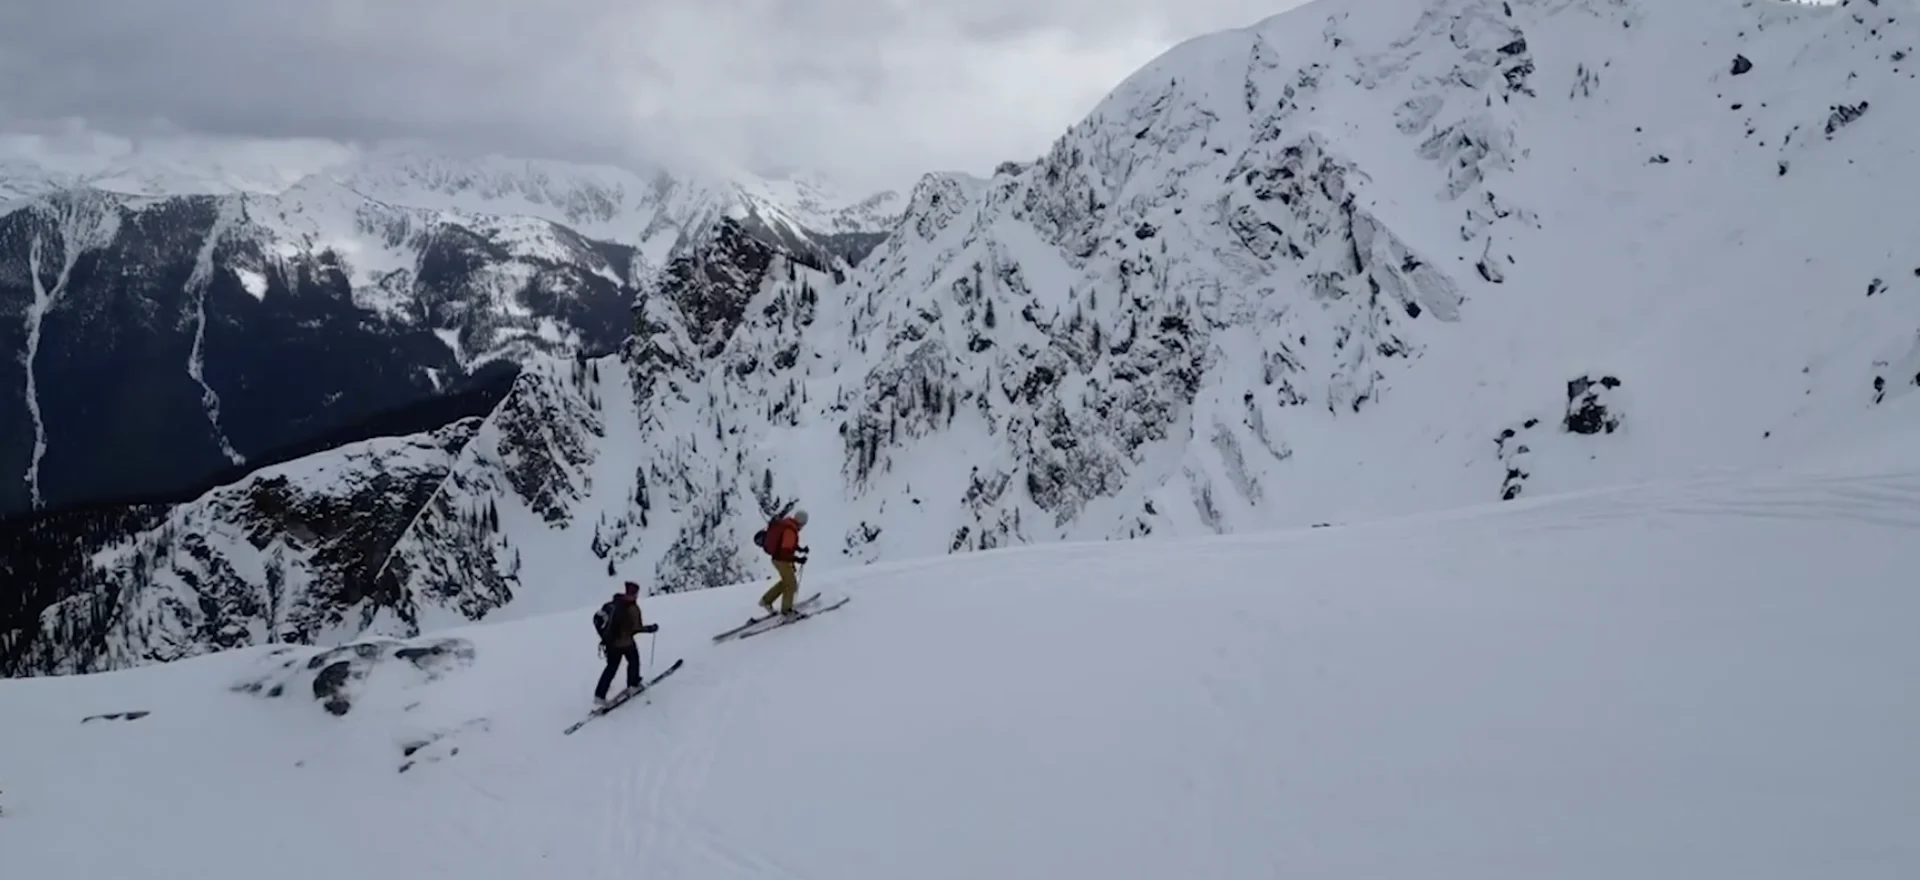 Going backcountry skiing? Watch this first